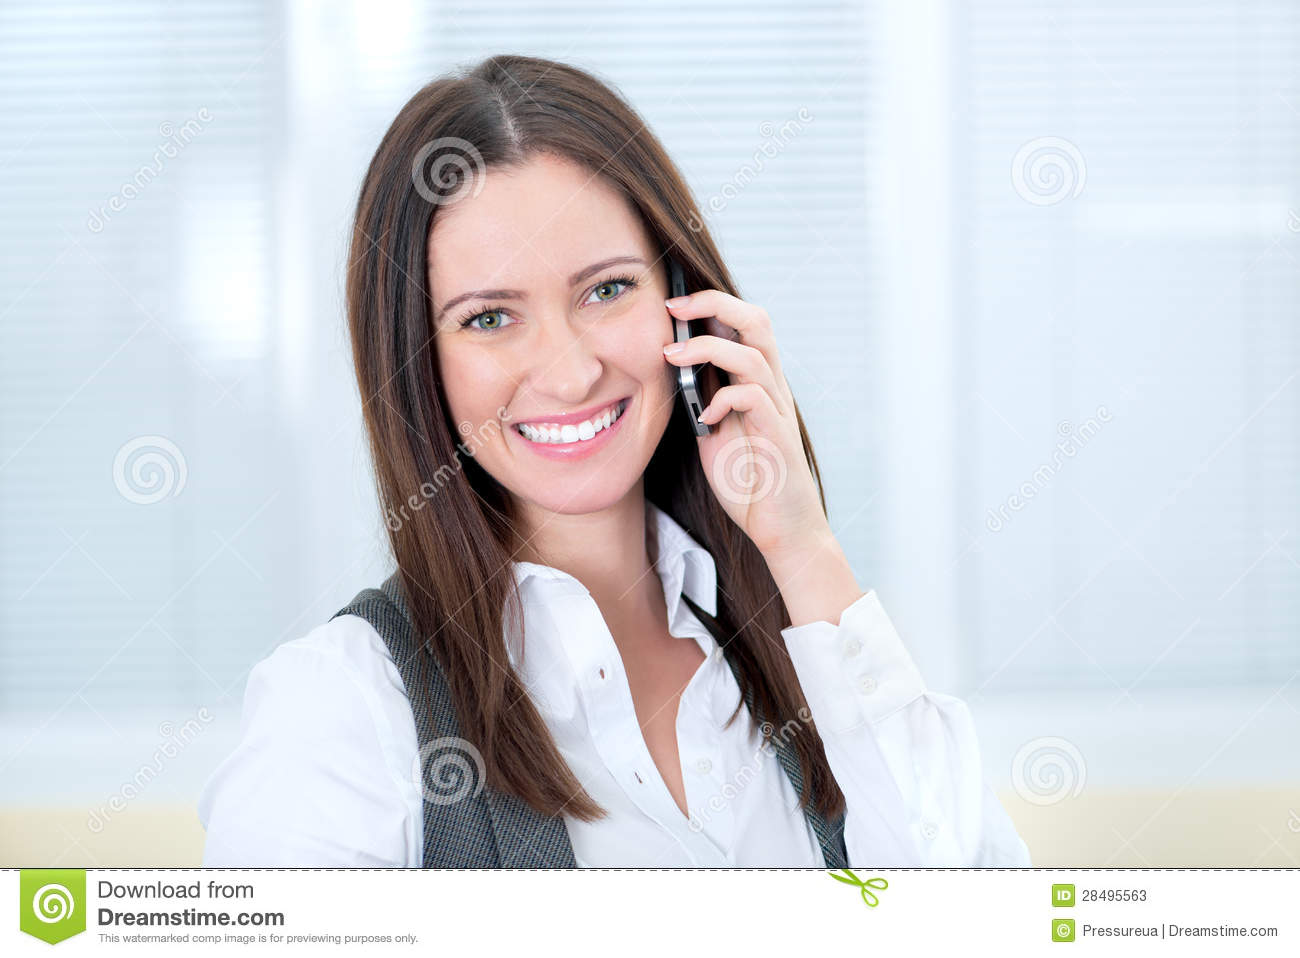 Smiling Business Lady With Mobile Phone Stock Photos   Image  28495563